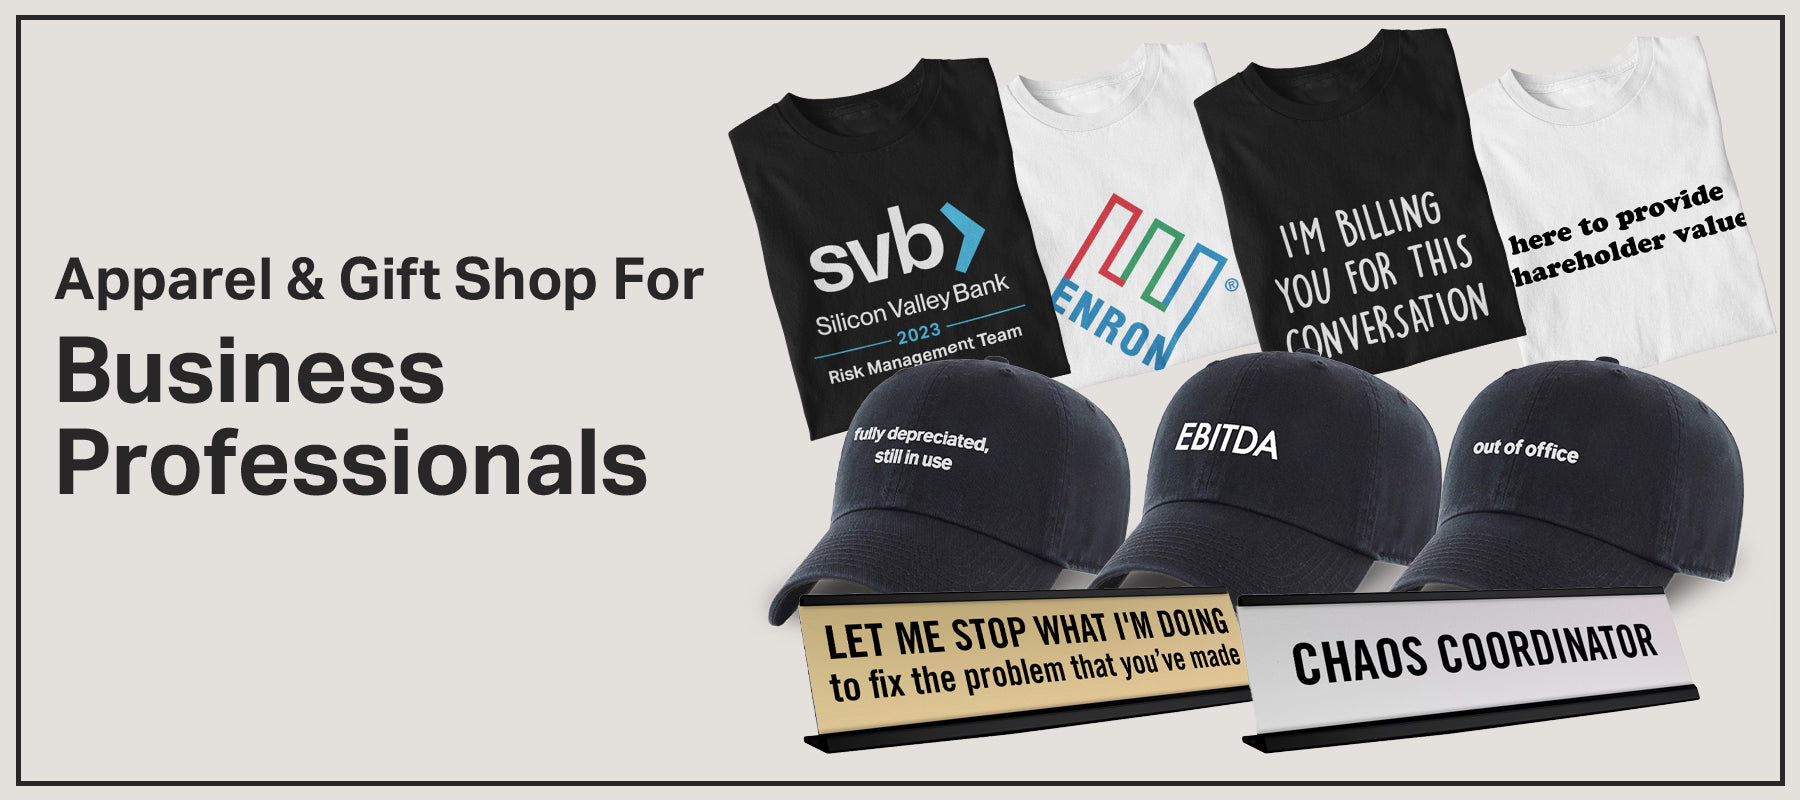 Apparel & Gifts For Business Professionals